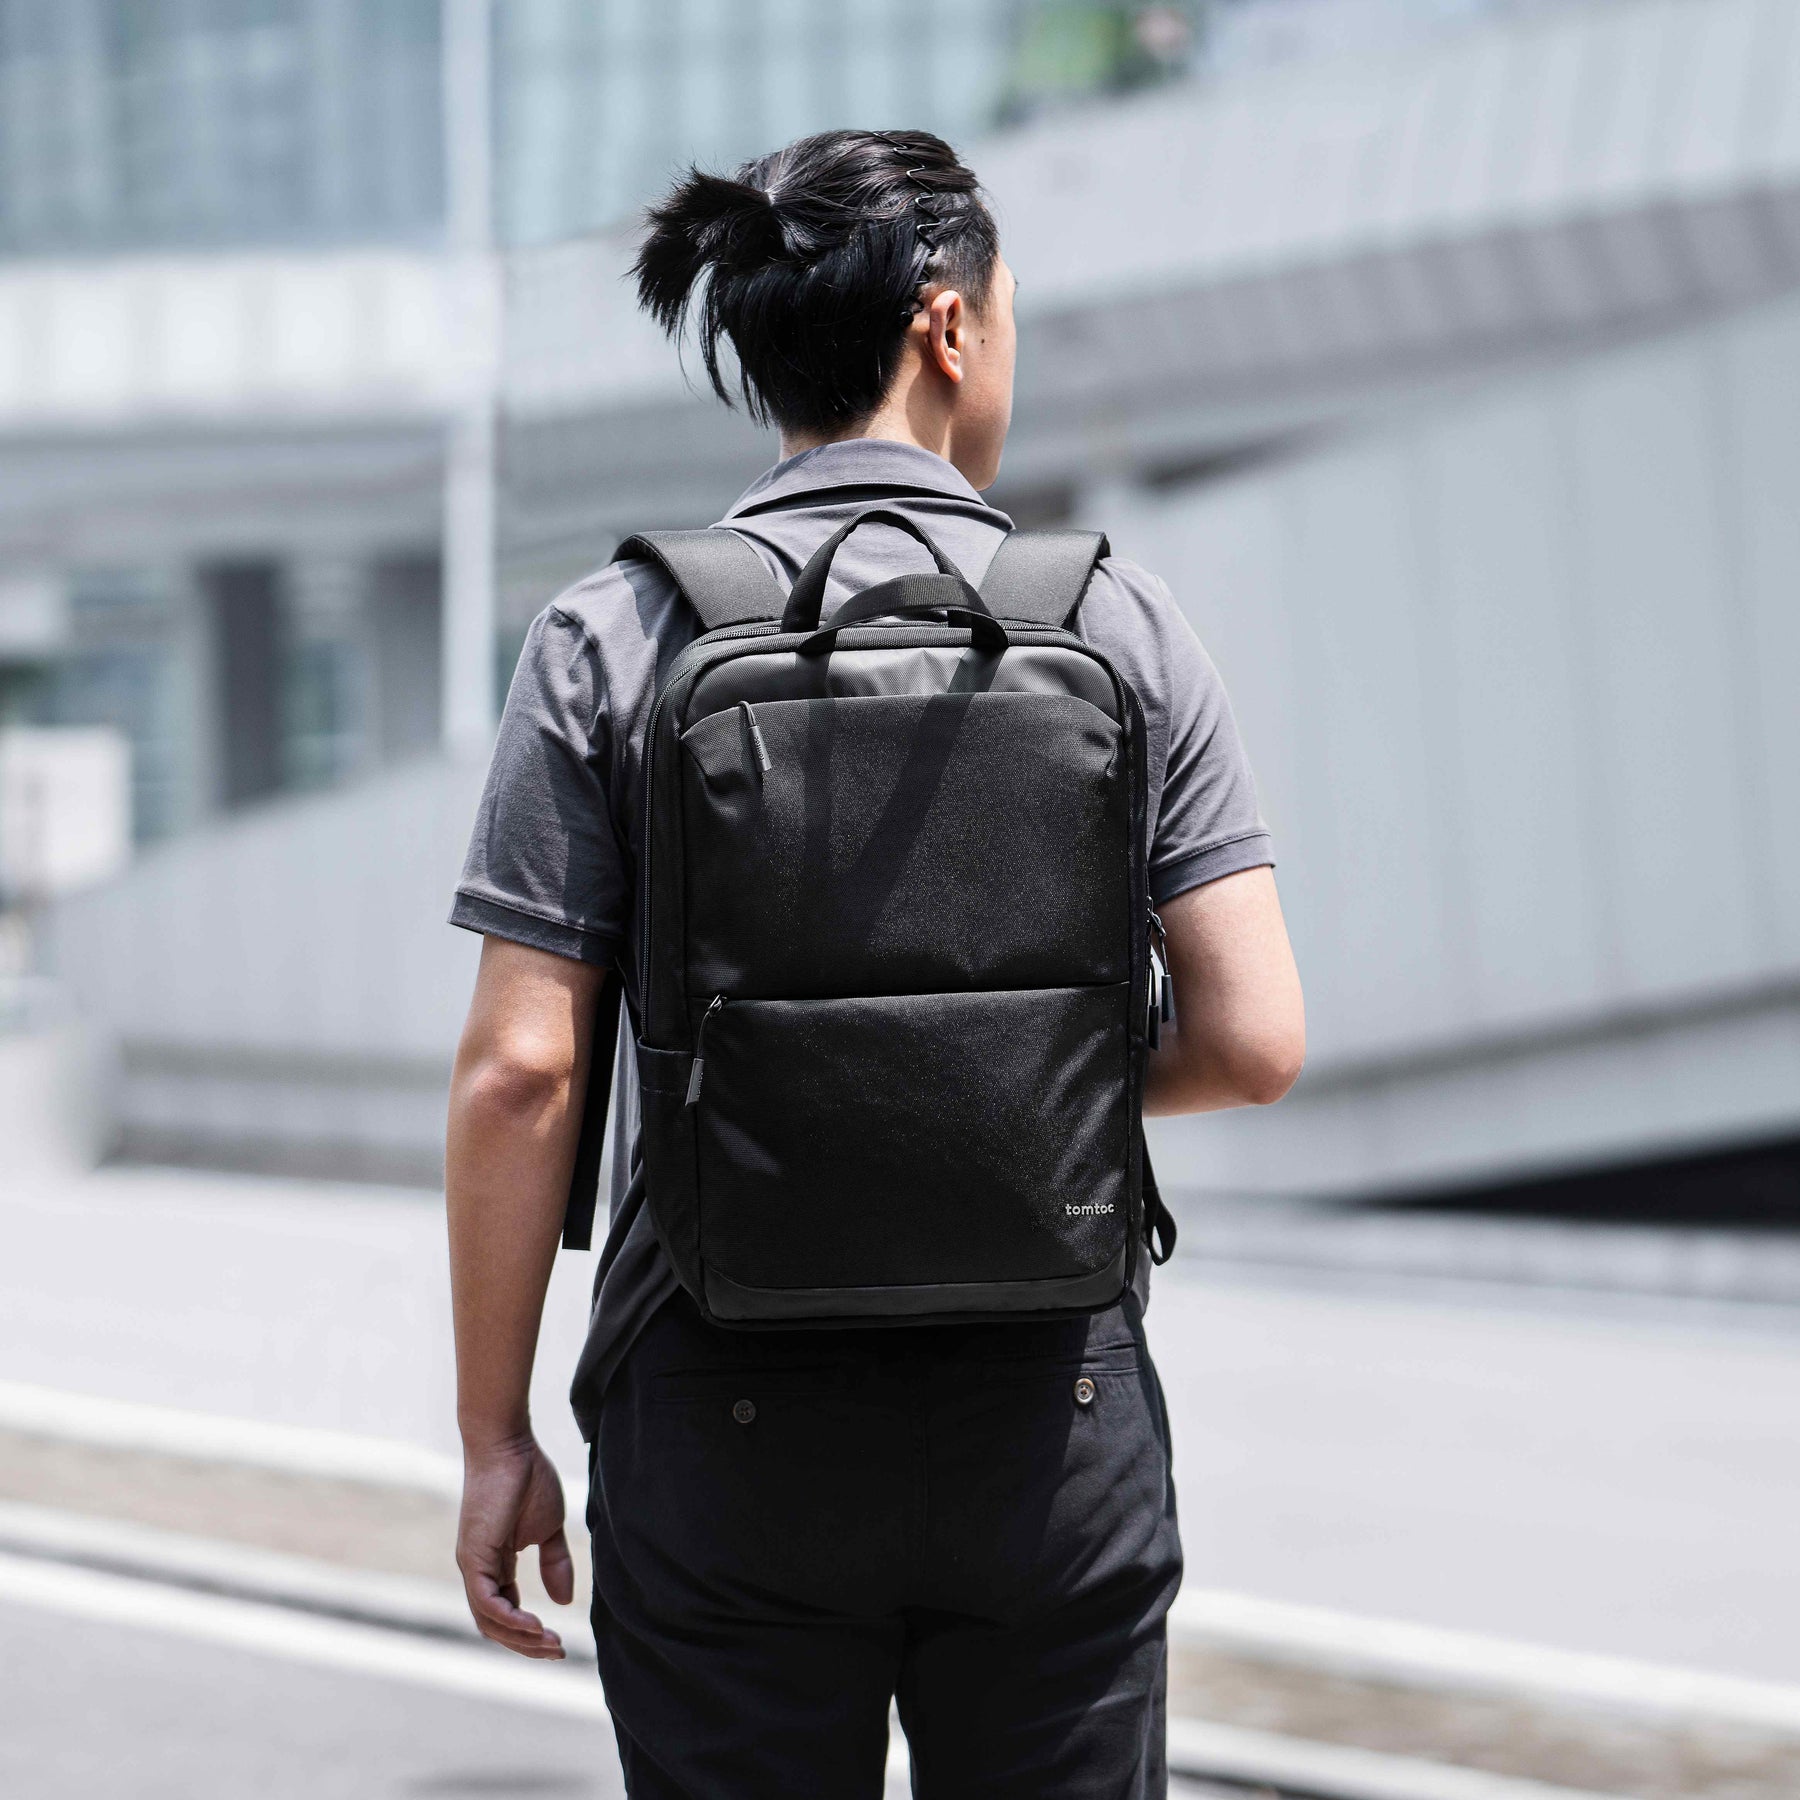 Navigator-T68 Laptop Backpack with 15.6 Inch & 26L